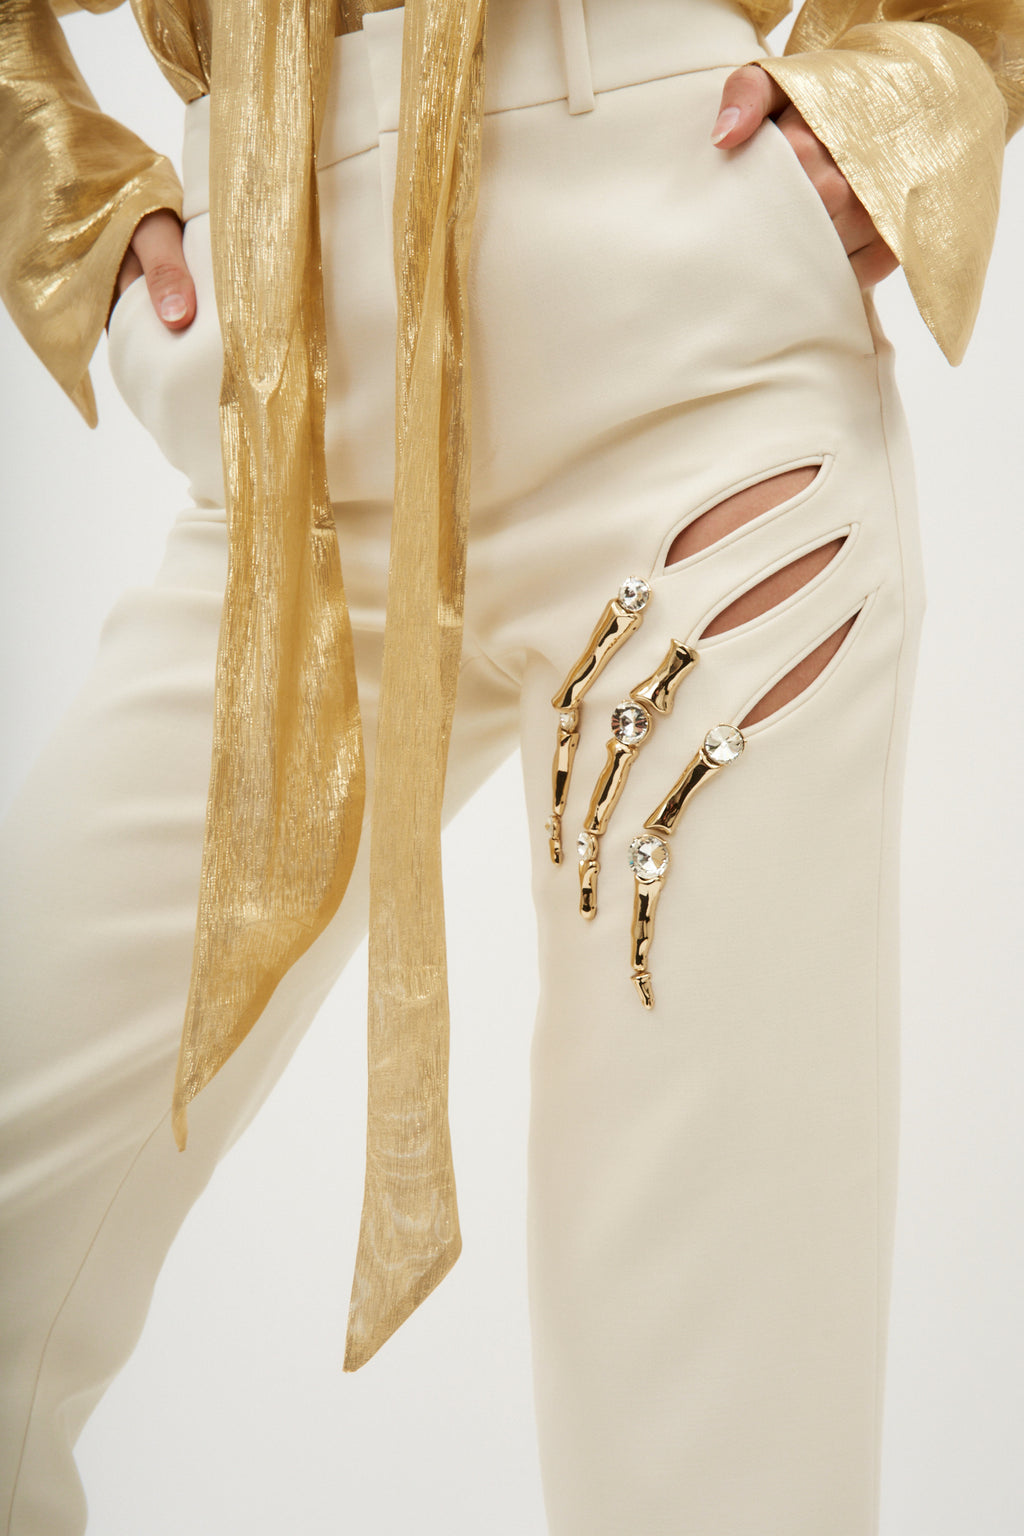 Claw Cutout Ivory Trouser